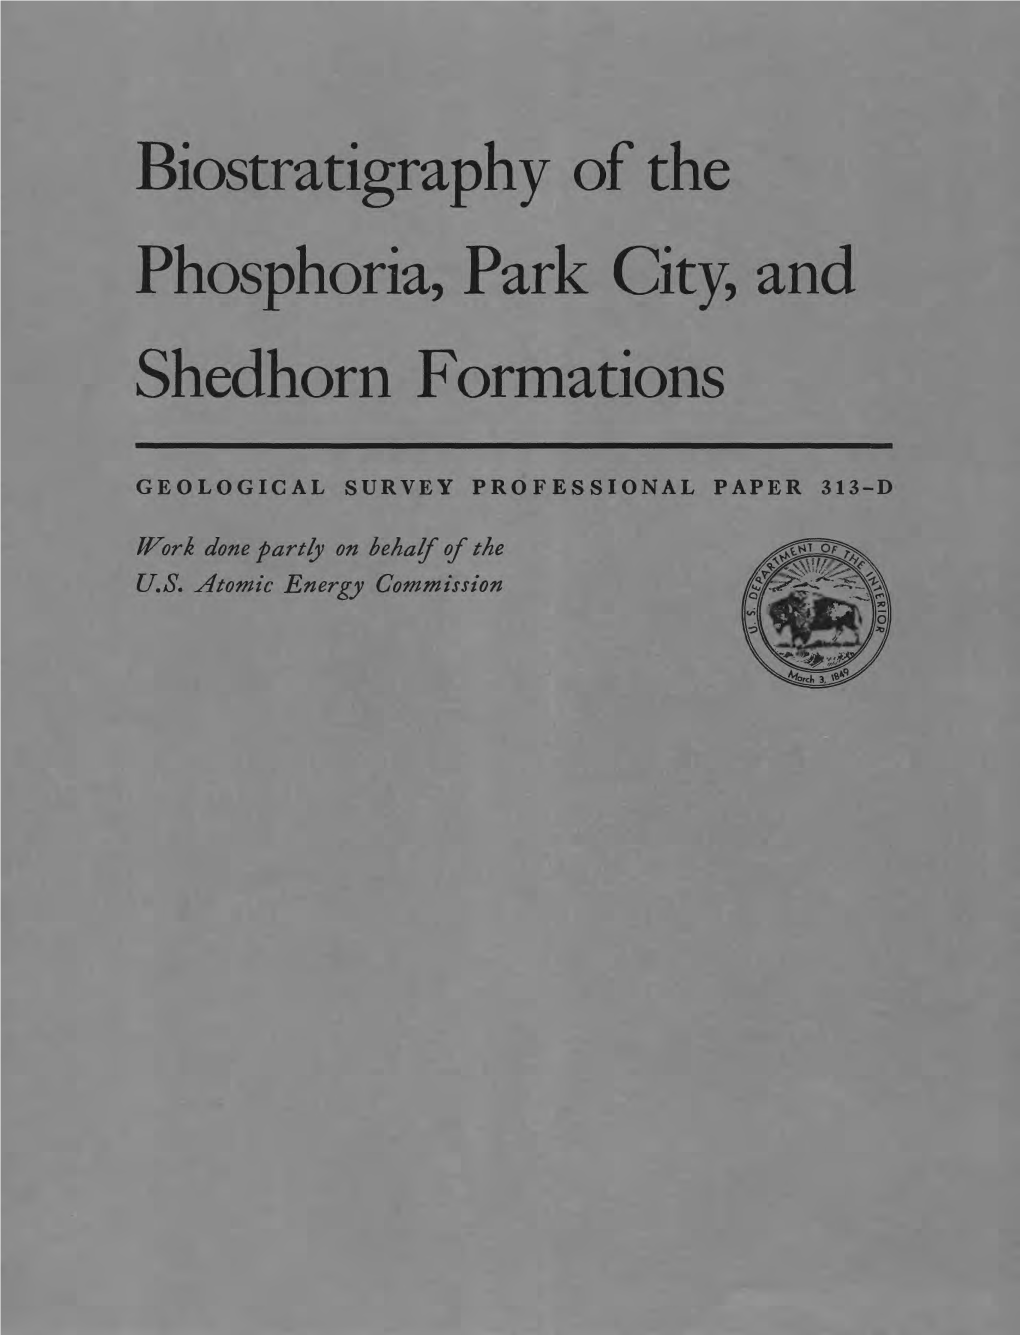 Biostratigraphy of the Phosphoria, Park City, and Shedhorn Formations